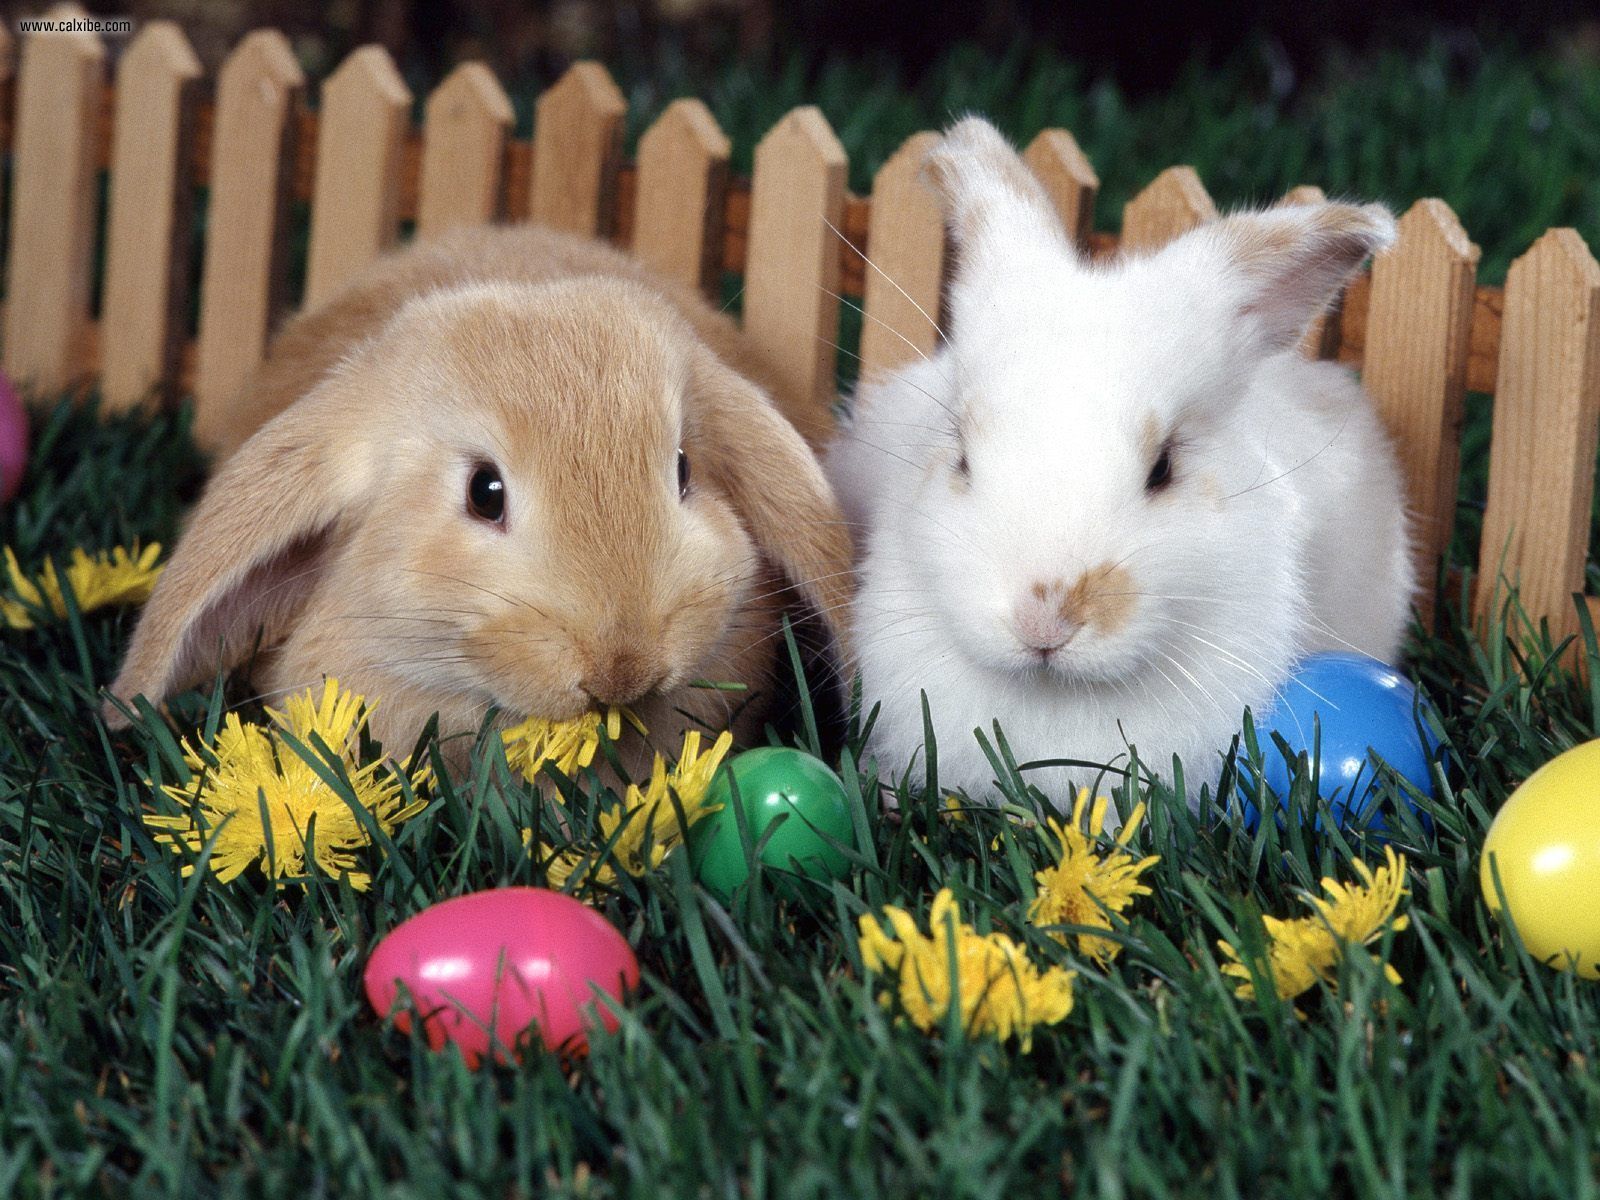 The Easter Wallpaper Category Of HD Bunnies Is